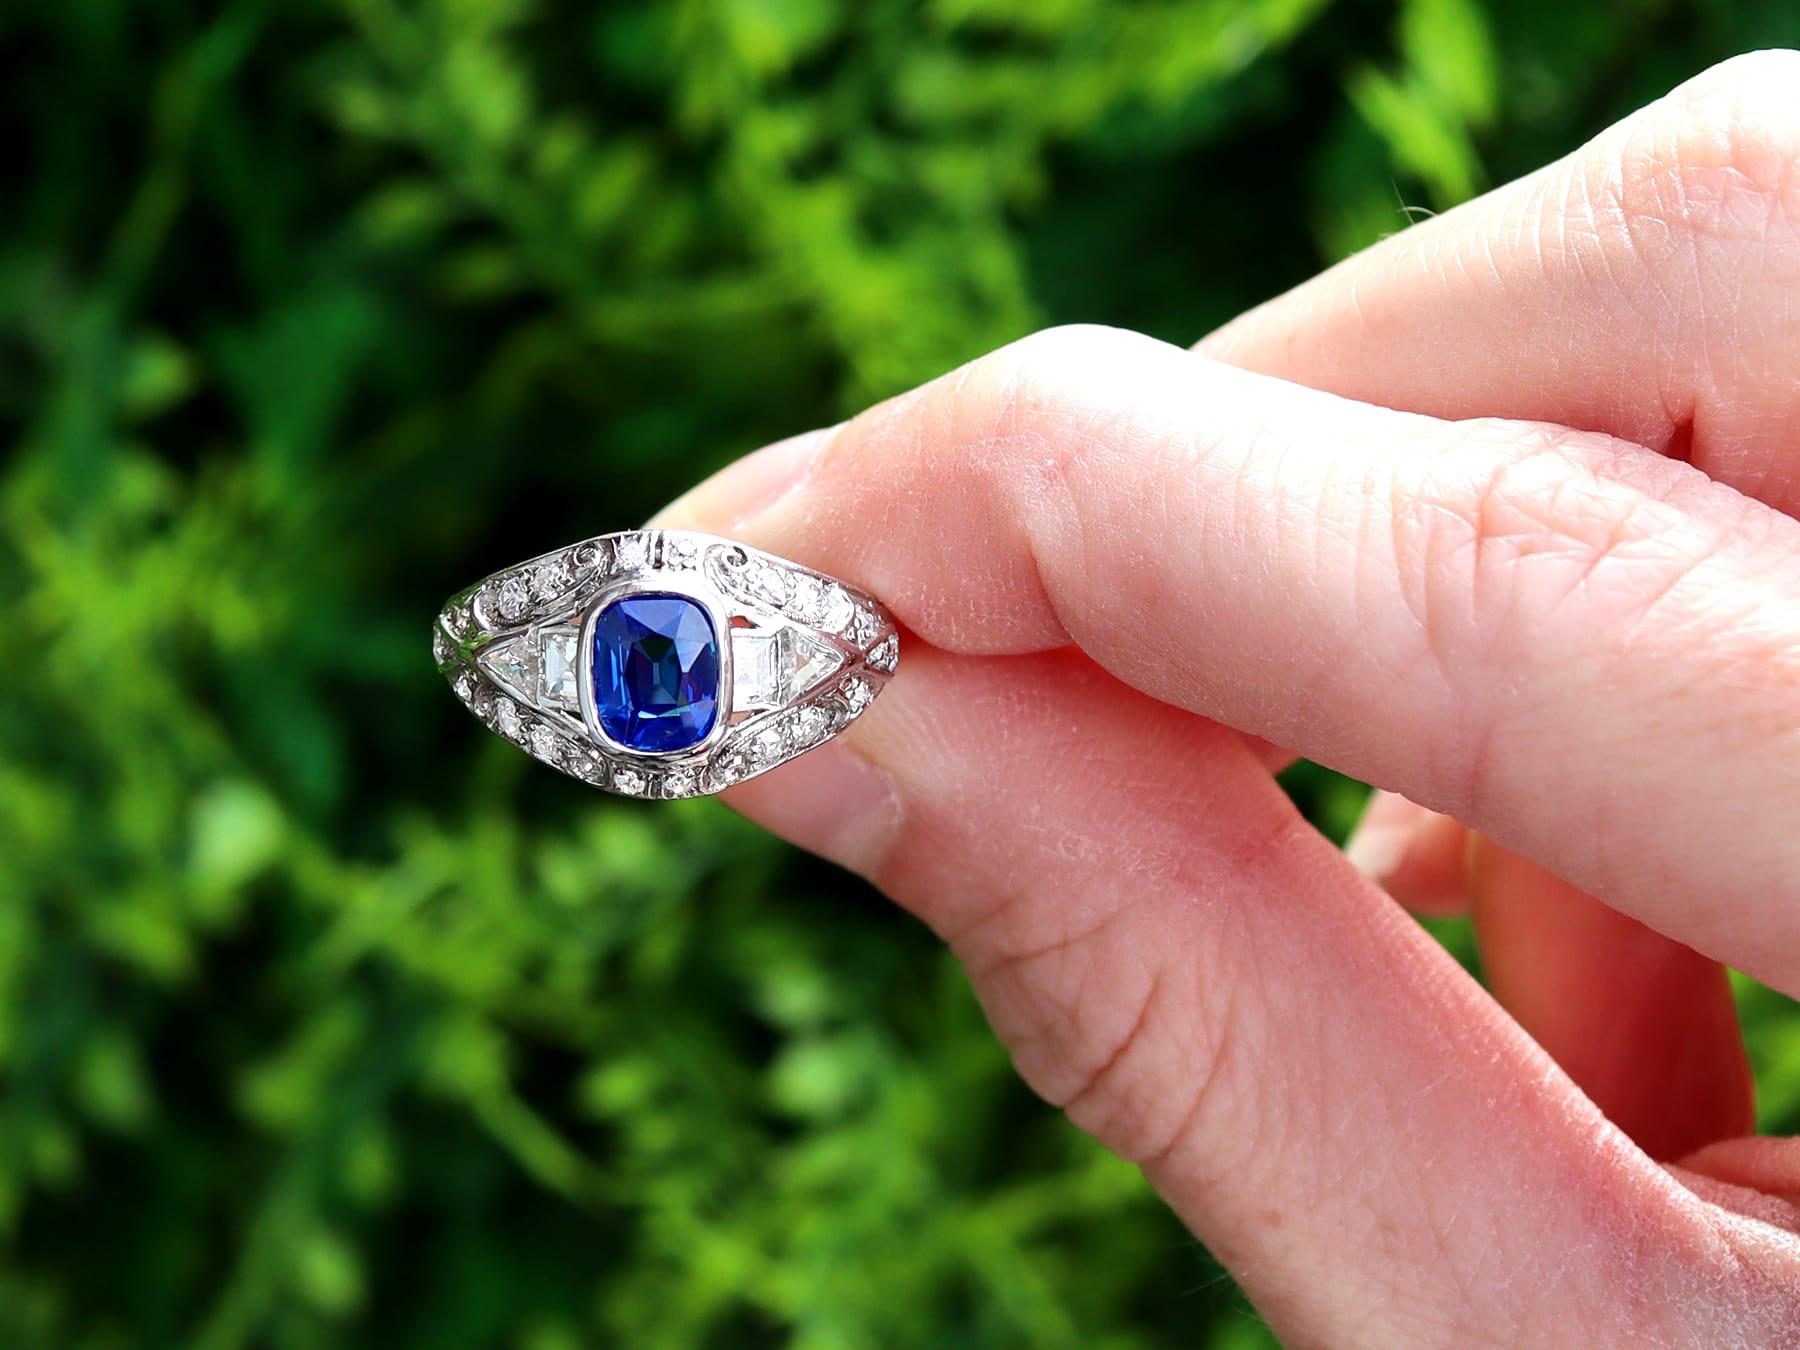 A fine and impressive vintage 1.32 carat sapphire and 0.52 carat diamond, platinum cocktail ring; part of our diverse vintage sapphire jewellery collections

This stunning, fine and impressive sapphire and diamond ring has been crafted in